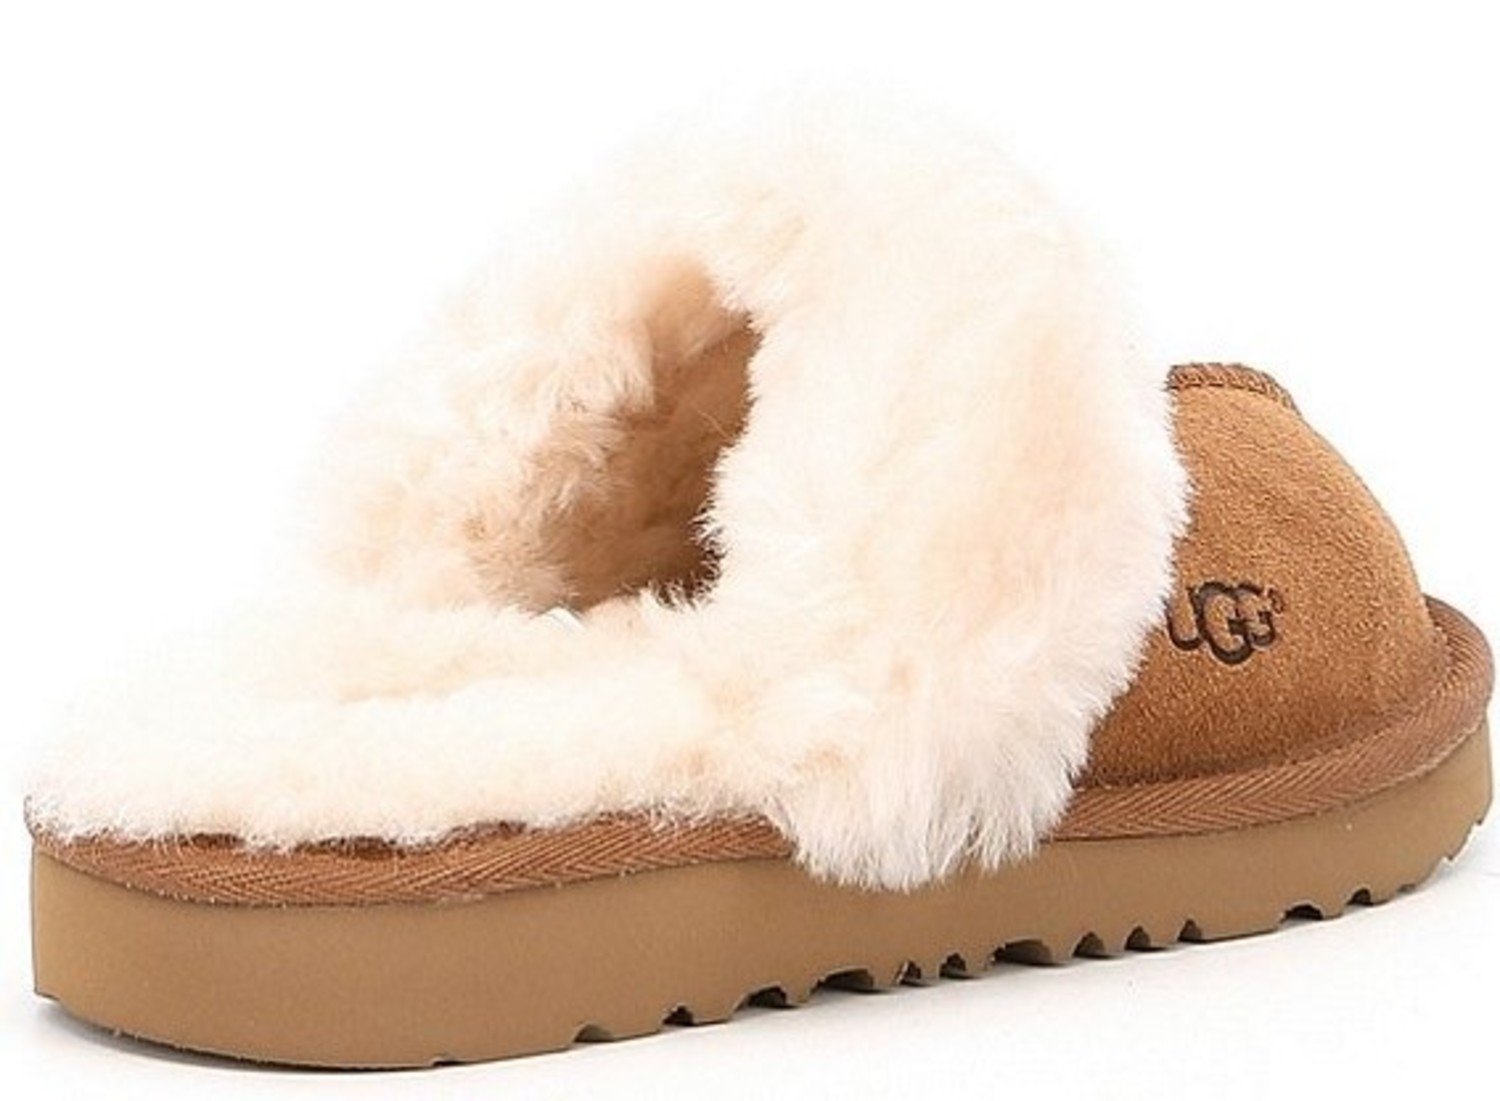 UGG Girl's Cozy II Chestnut Slipper - Continental Shoes